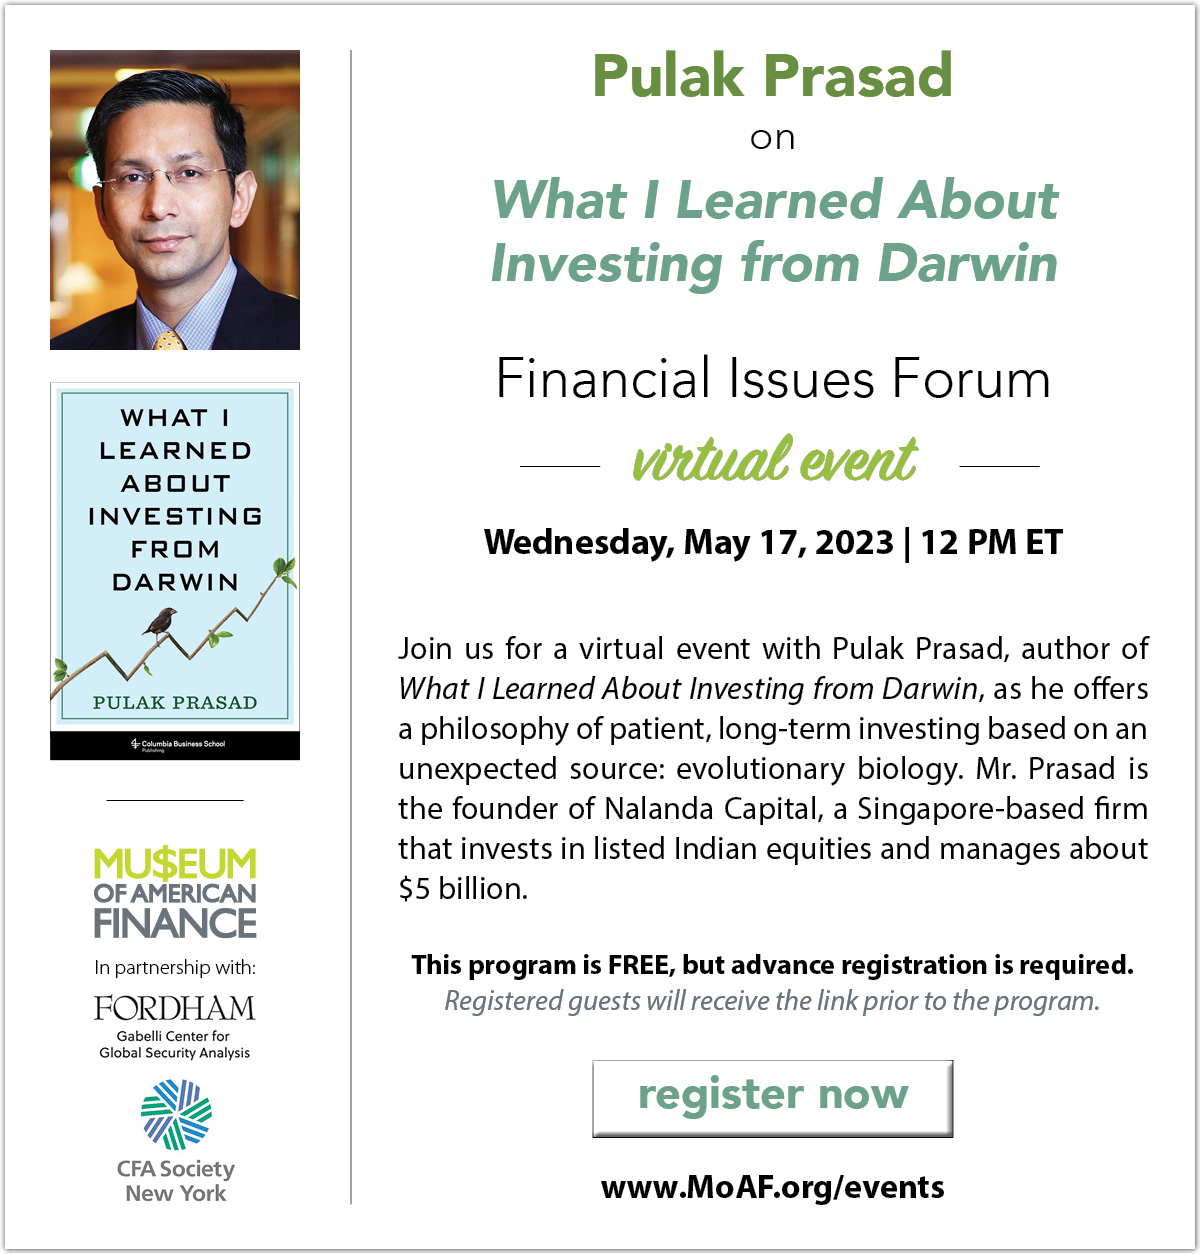 Pulak Prasad on What I Learned About Investing from Darwin